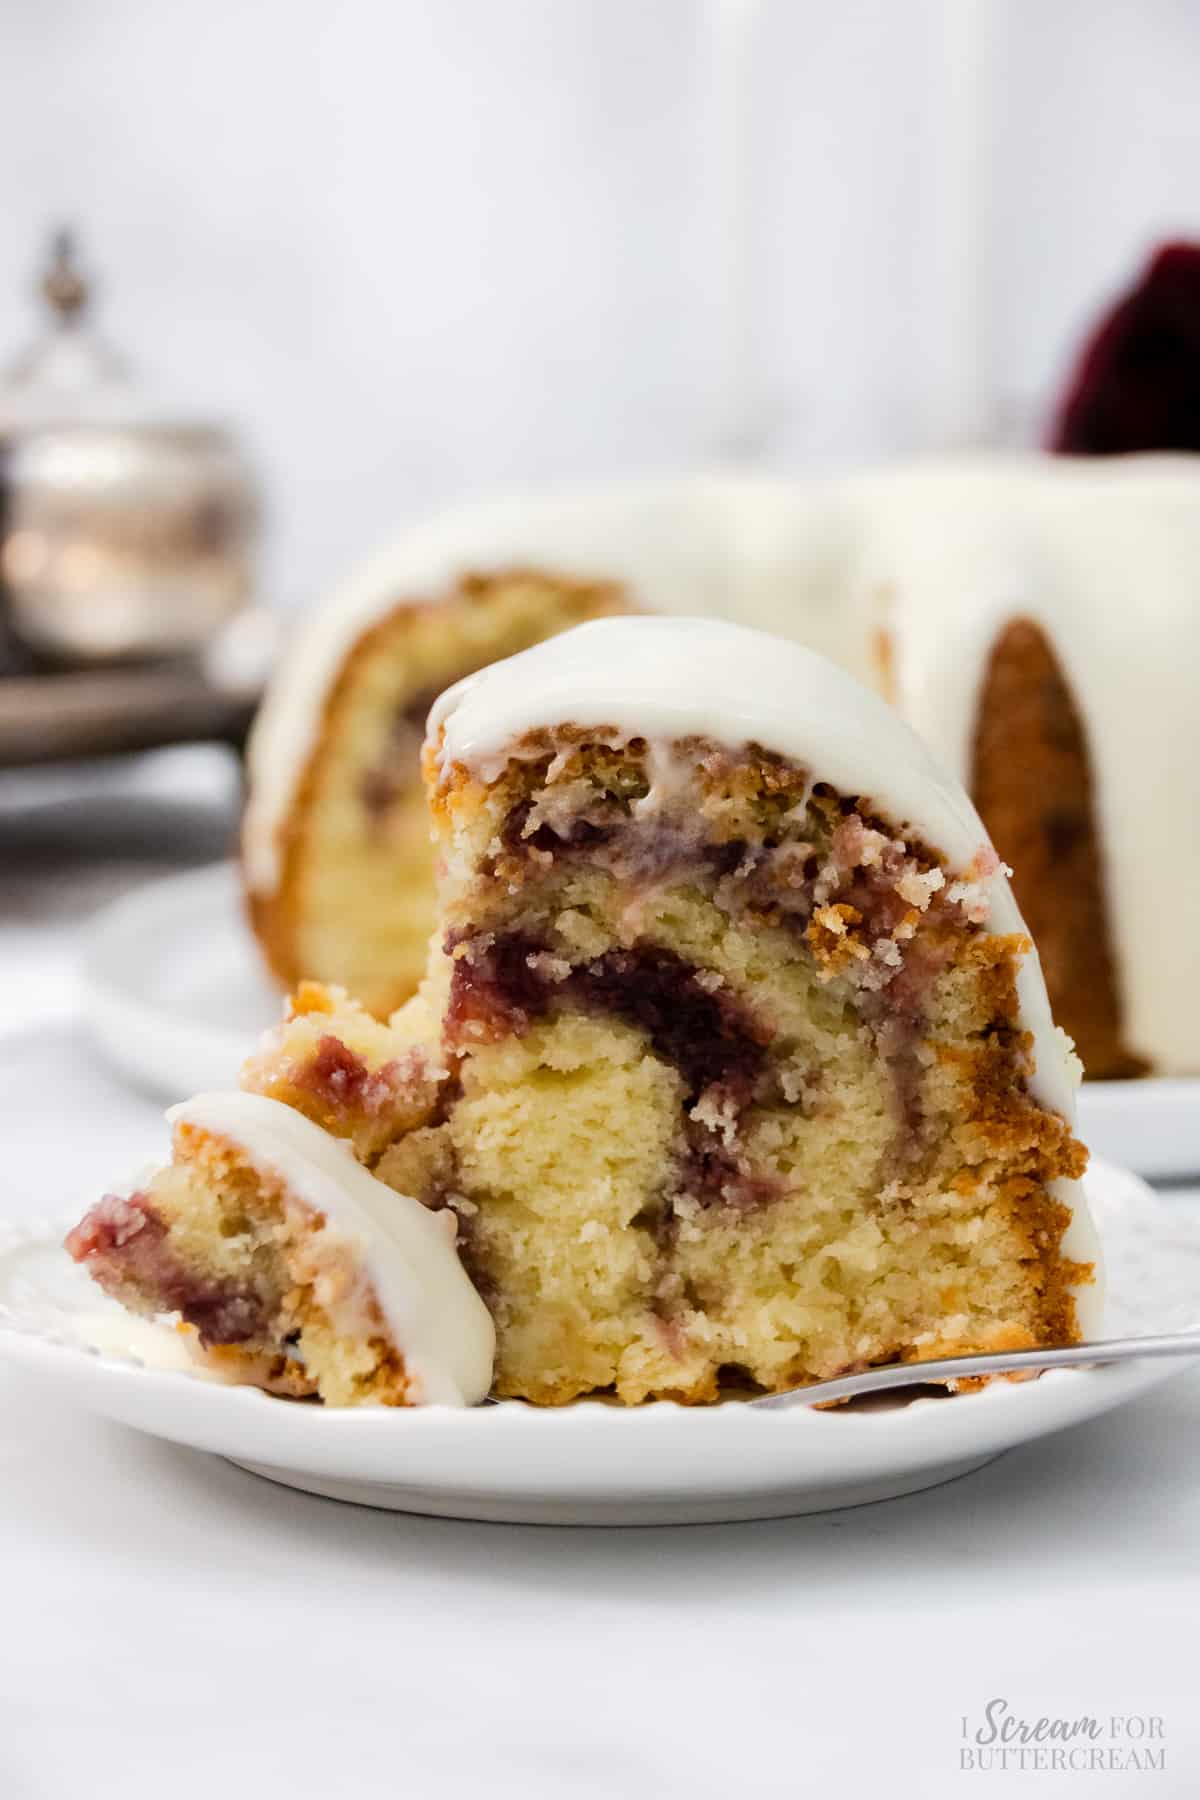 Slice of bundt cake with raspberry filling and fork.